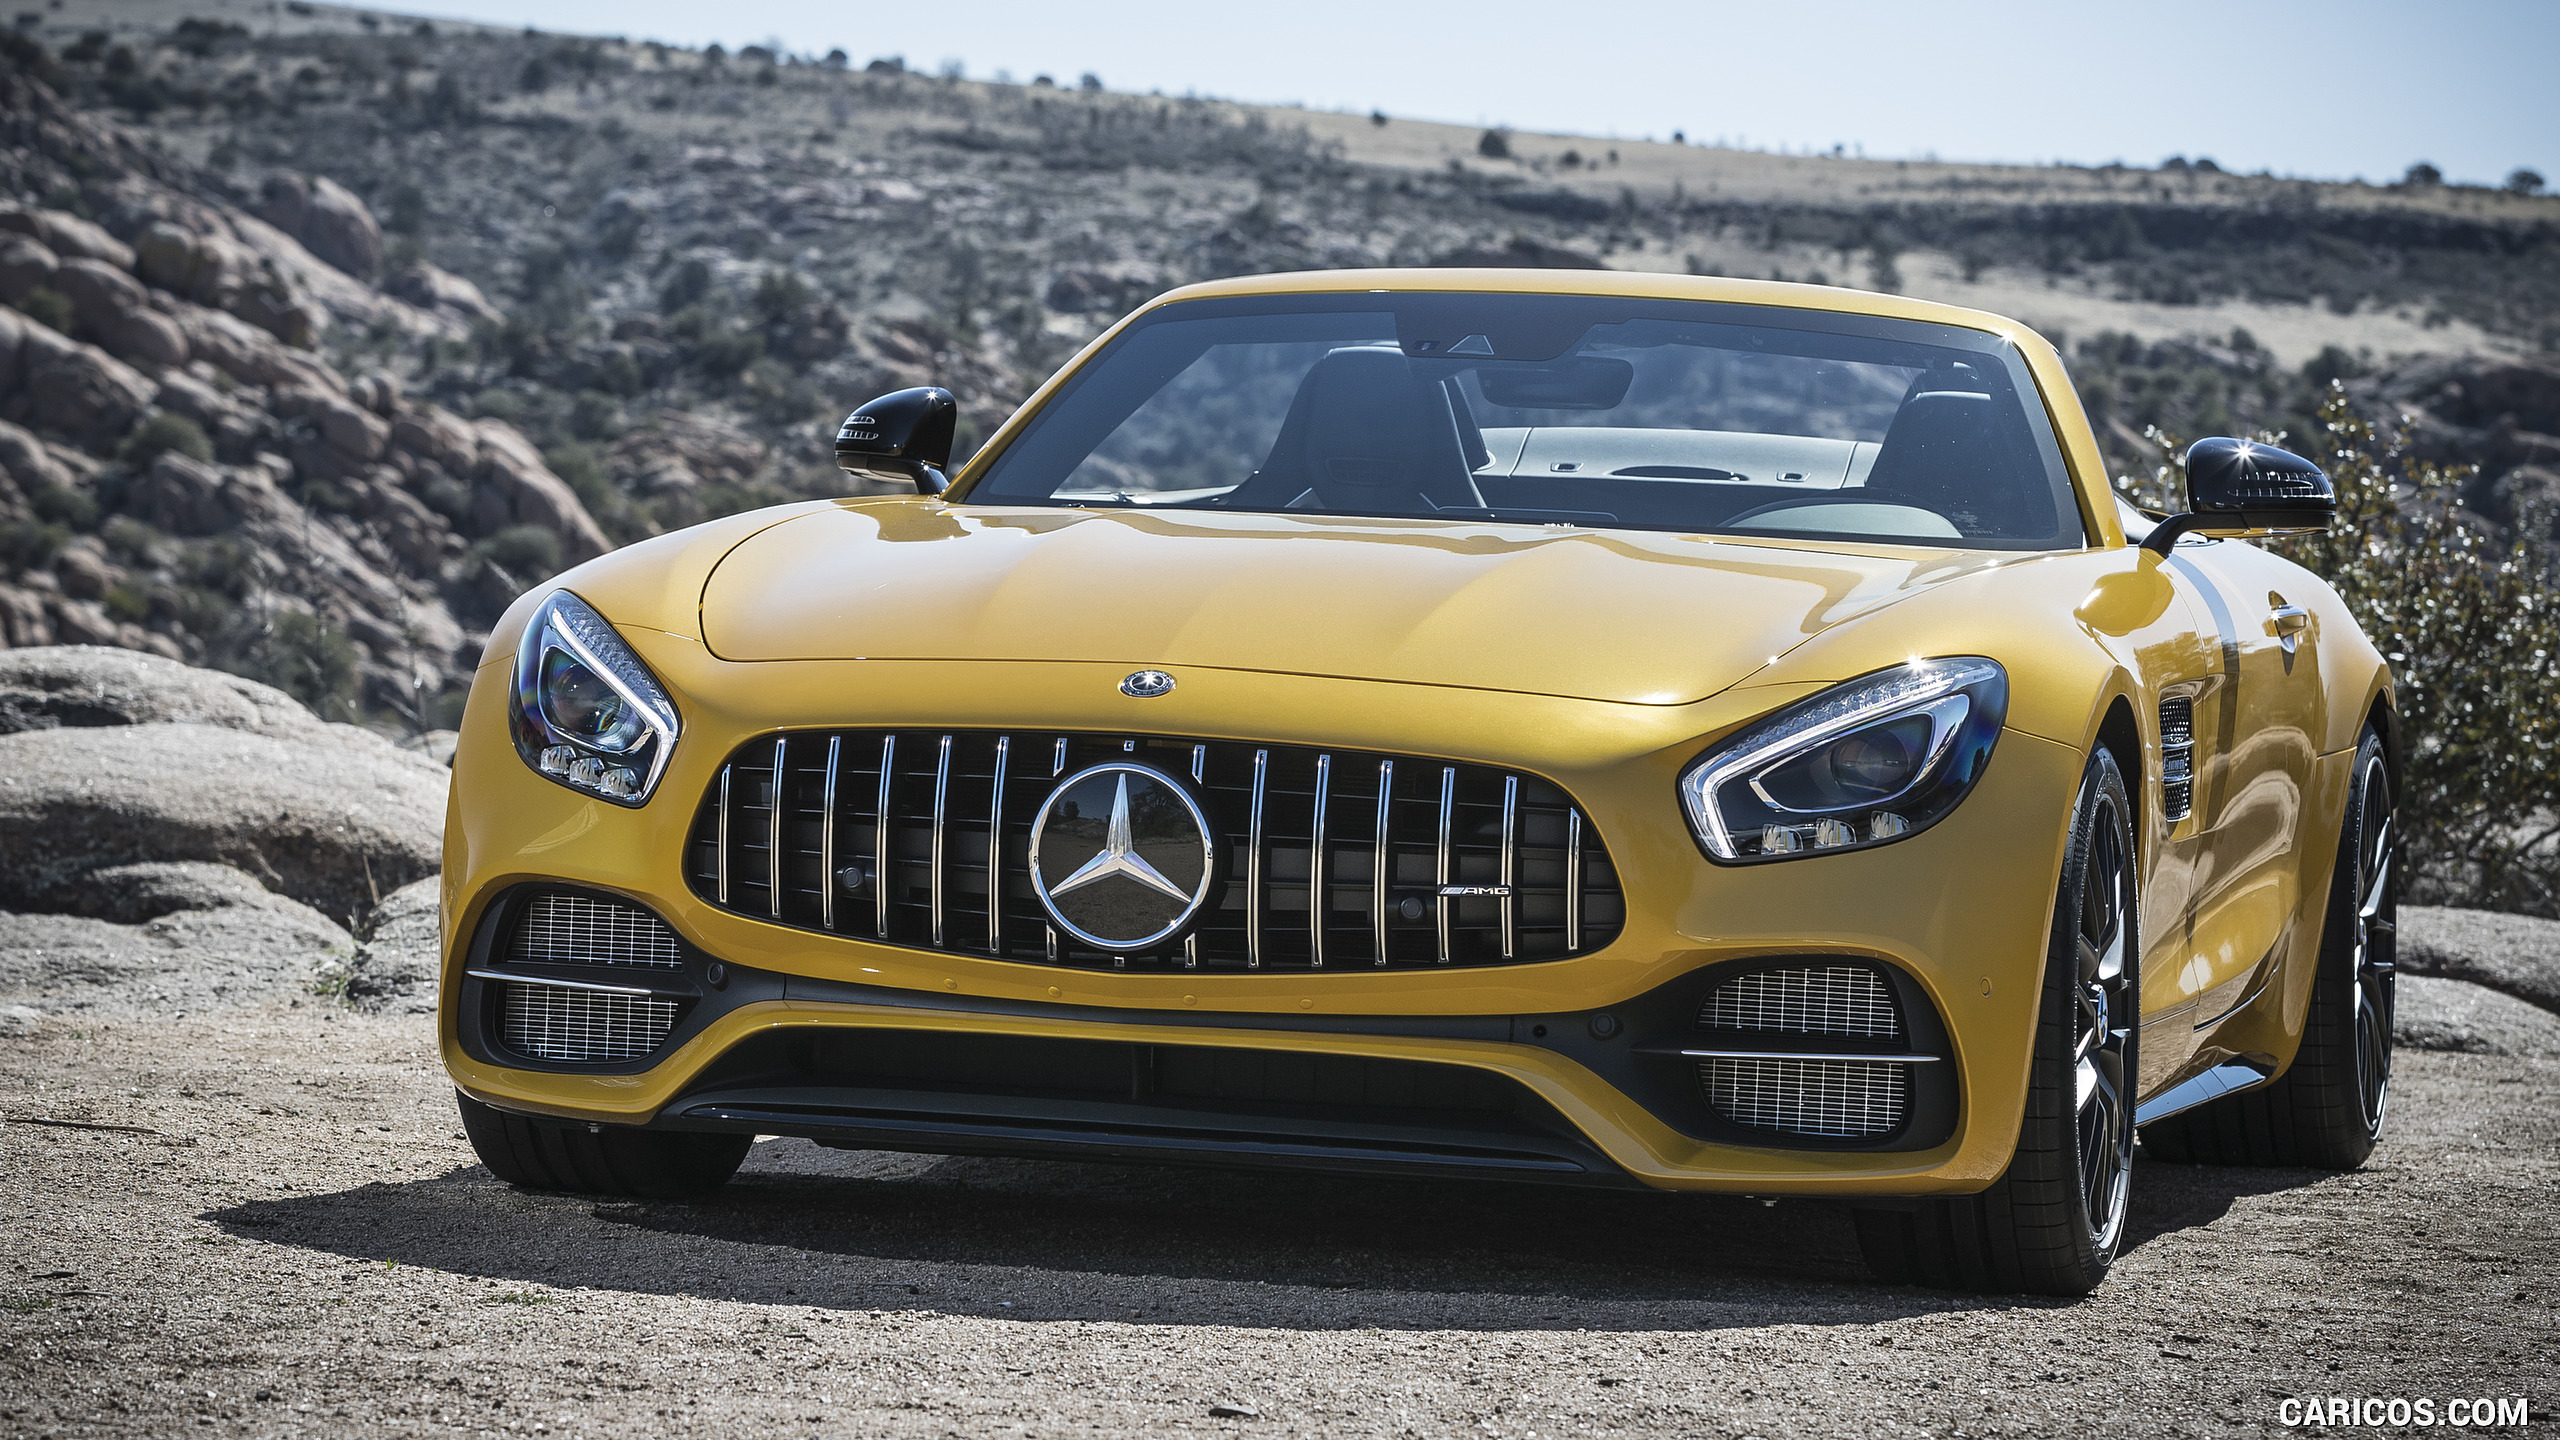 2018 Mercedes-AMG GT C Roadster - Front, #183 of 350